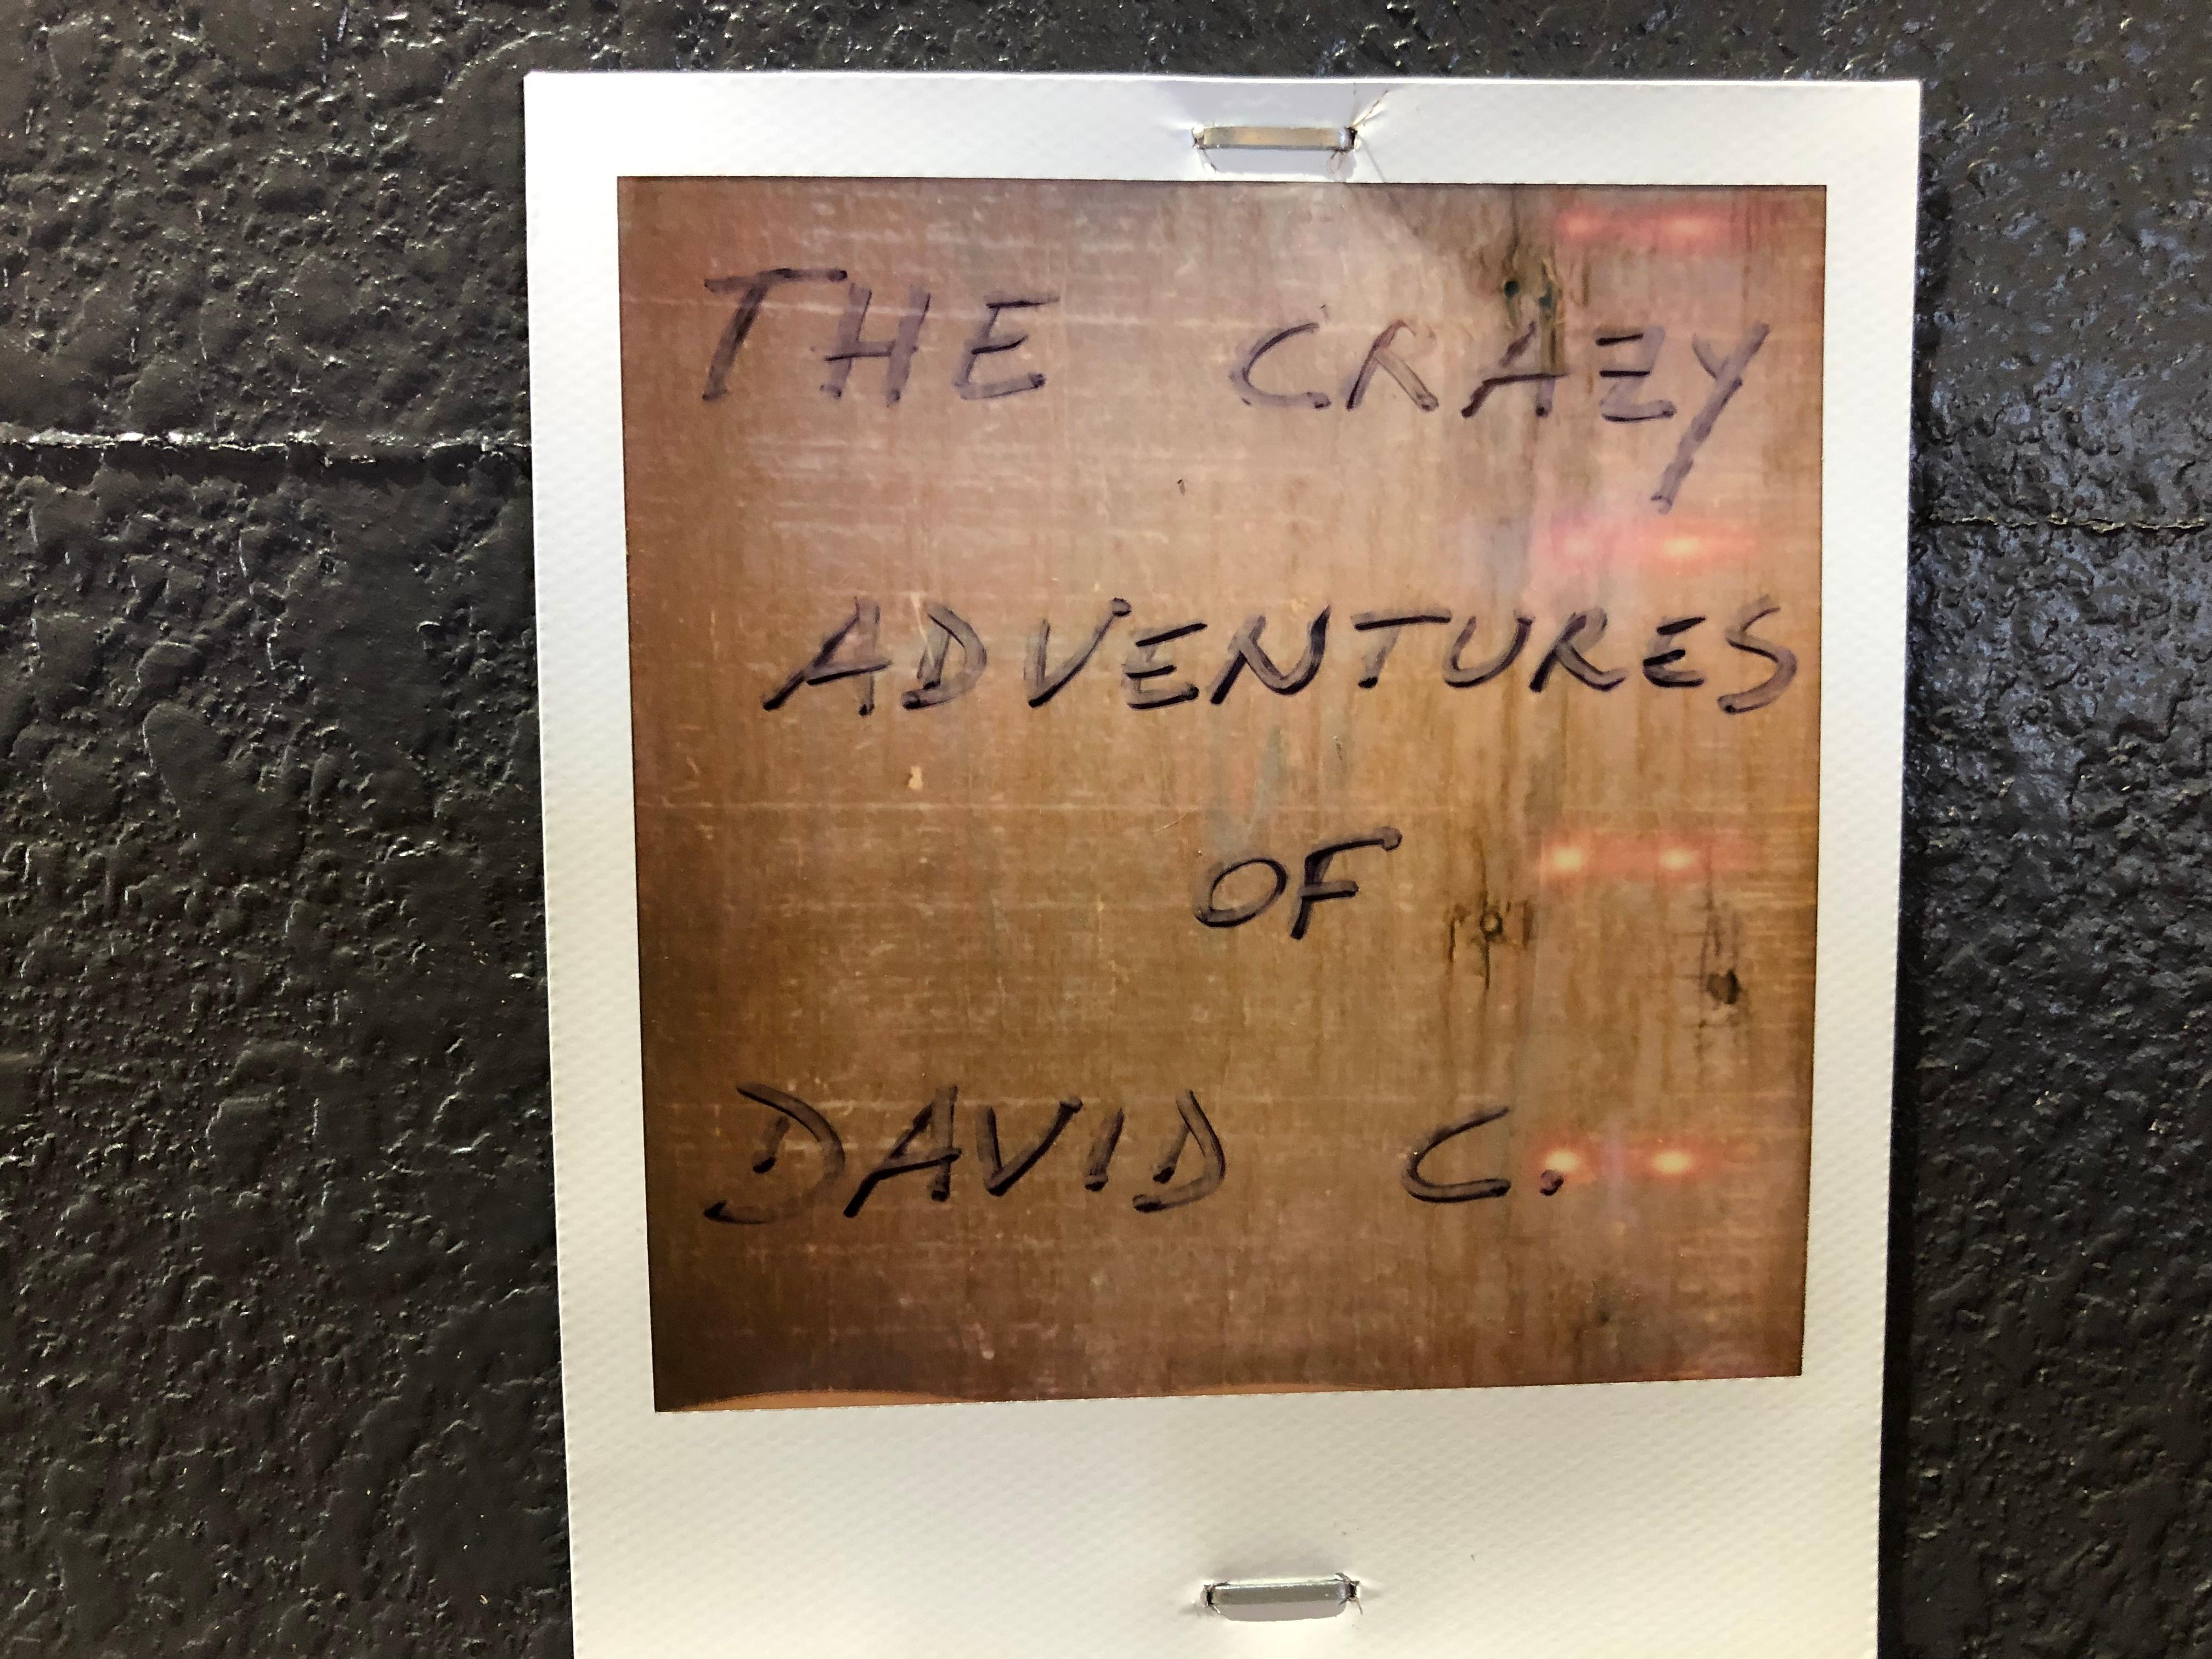 Color me Weird part of the series 'The crazy Adventures of David C.', - 2019, 

20x95cm installed, 20x20cm each, 
Edition of 7 plus 2 Artist Proofs.  
4 archival C-Prints based on the 4 Polaroids.  
Signature label and certificate. 
Artist inventory